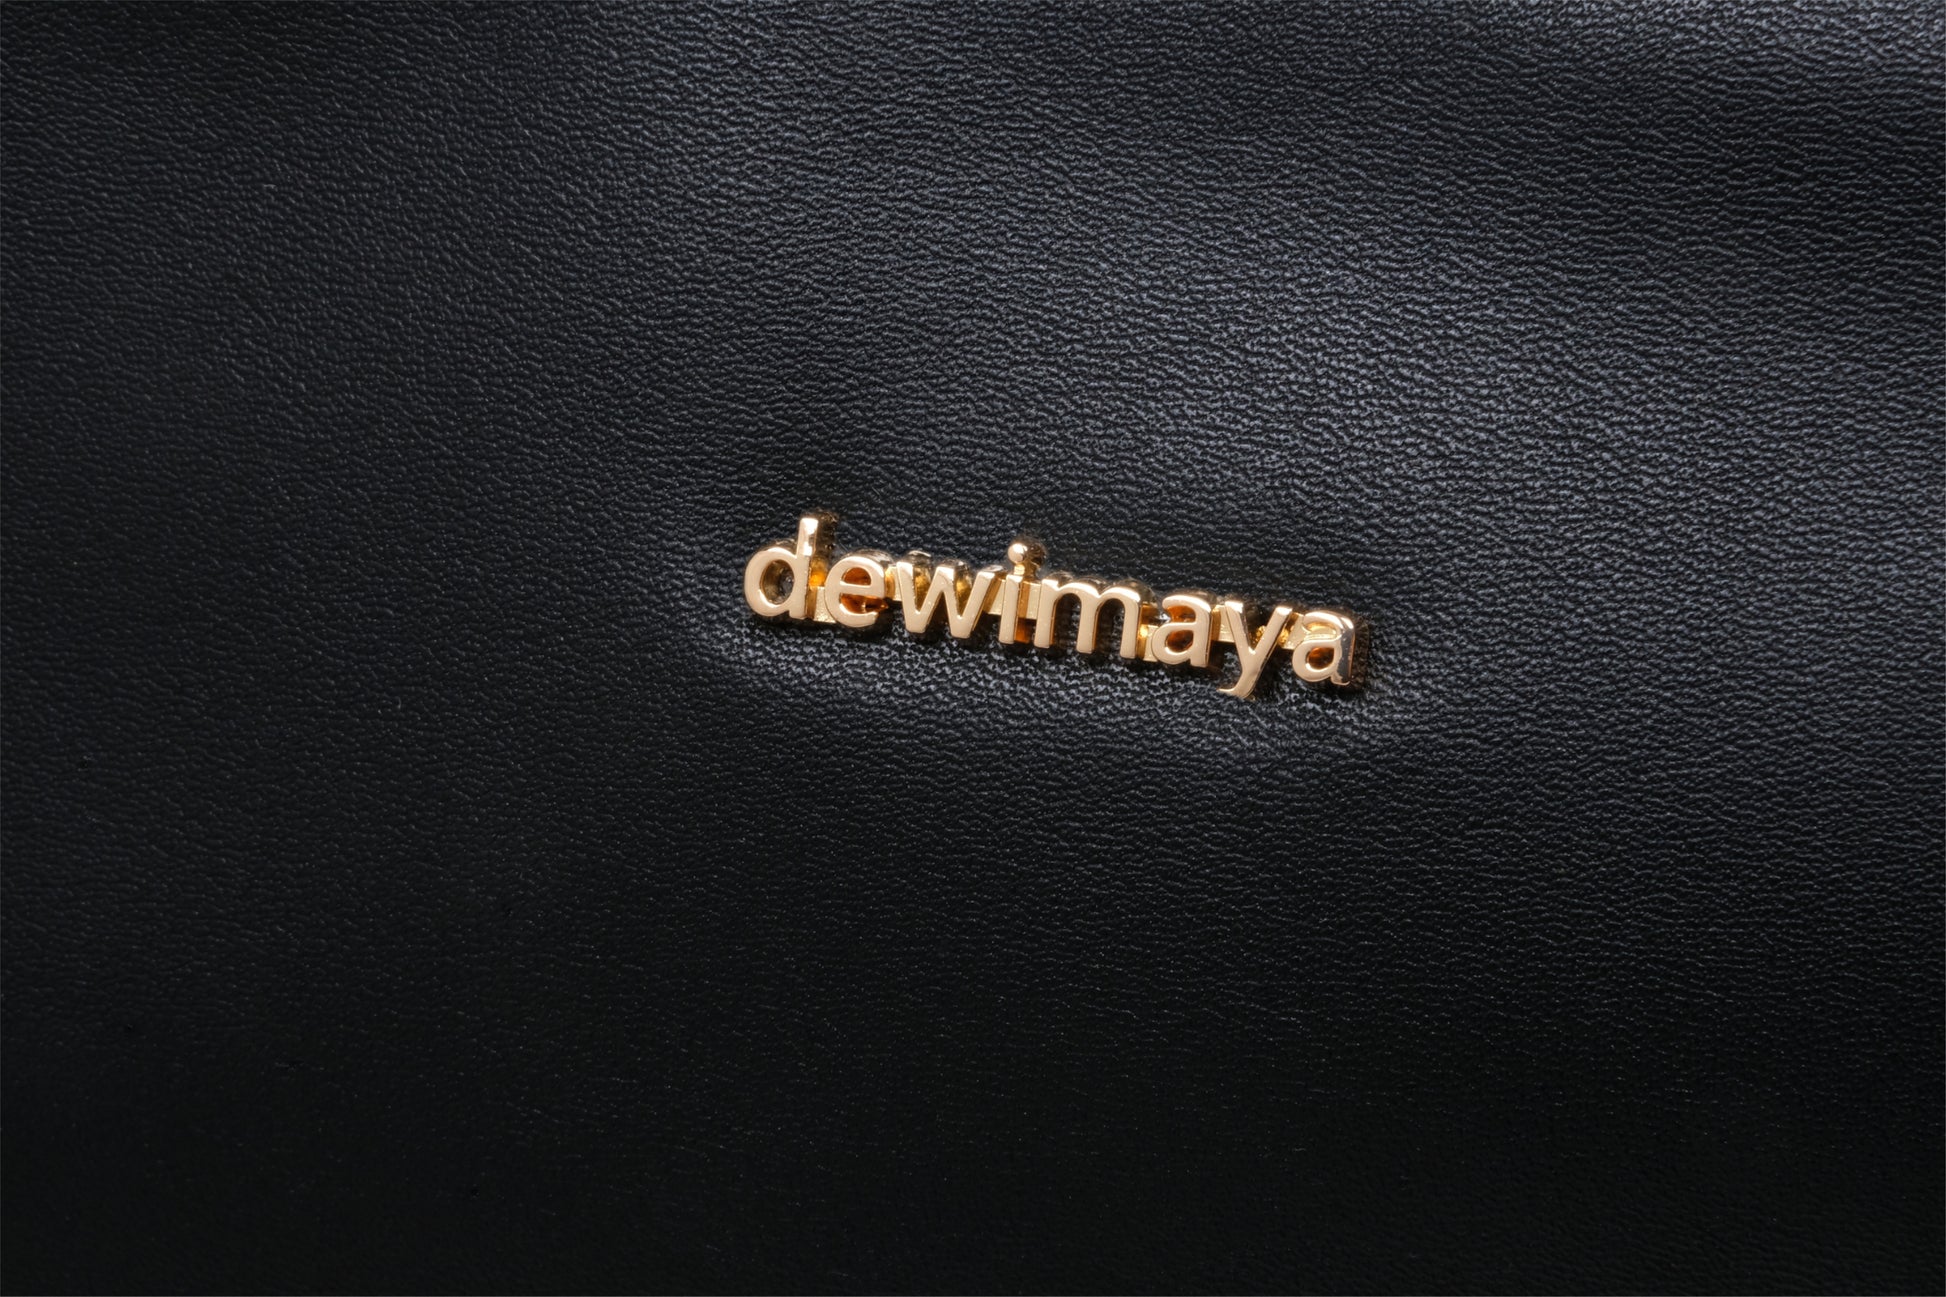 Rowi Pebble Grain Faux Leather Midnight Black Tote Bag Handbag made by Dewi Maya gold logo on second bag available at the best boutique in Upstate South Carolina Spartanburg Greenville Dewi Maya Boutique